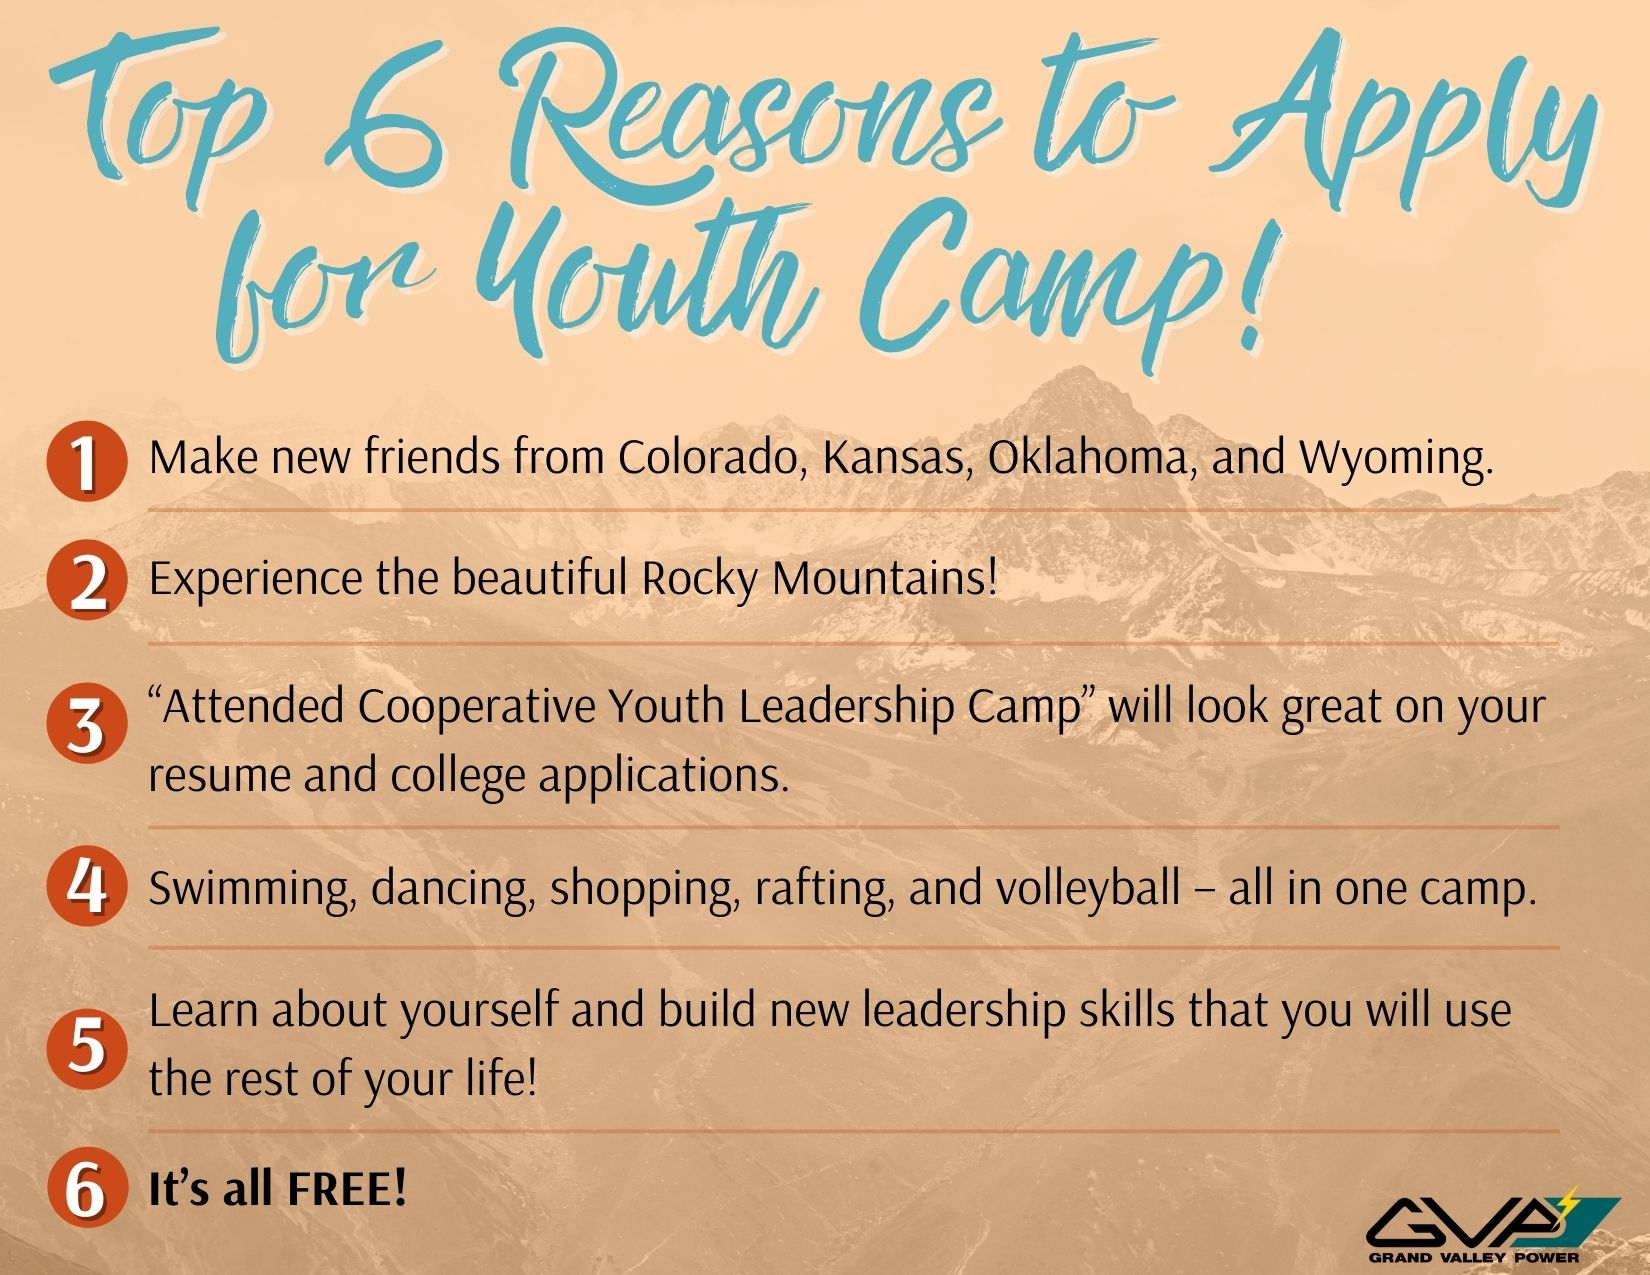 Top 6 Reasons to Apply for Camp